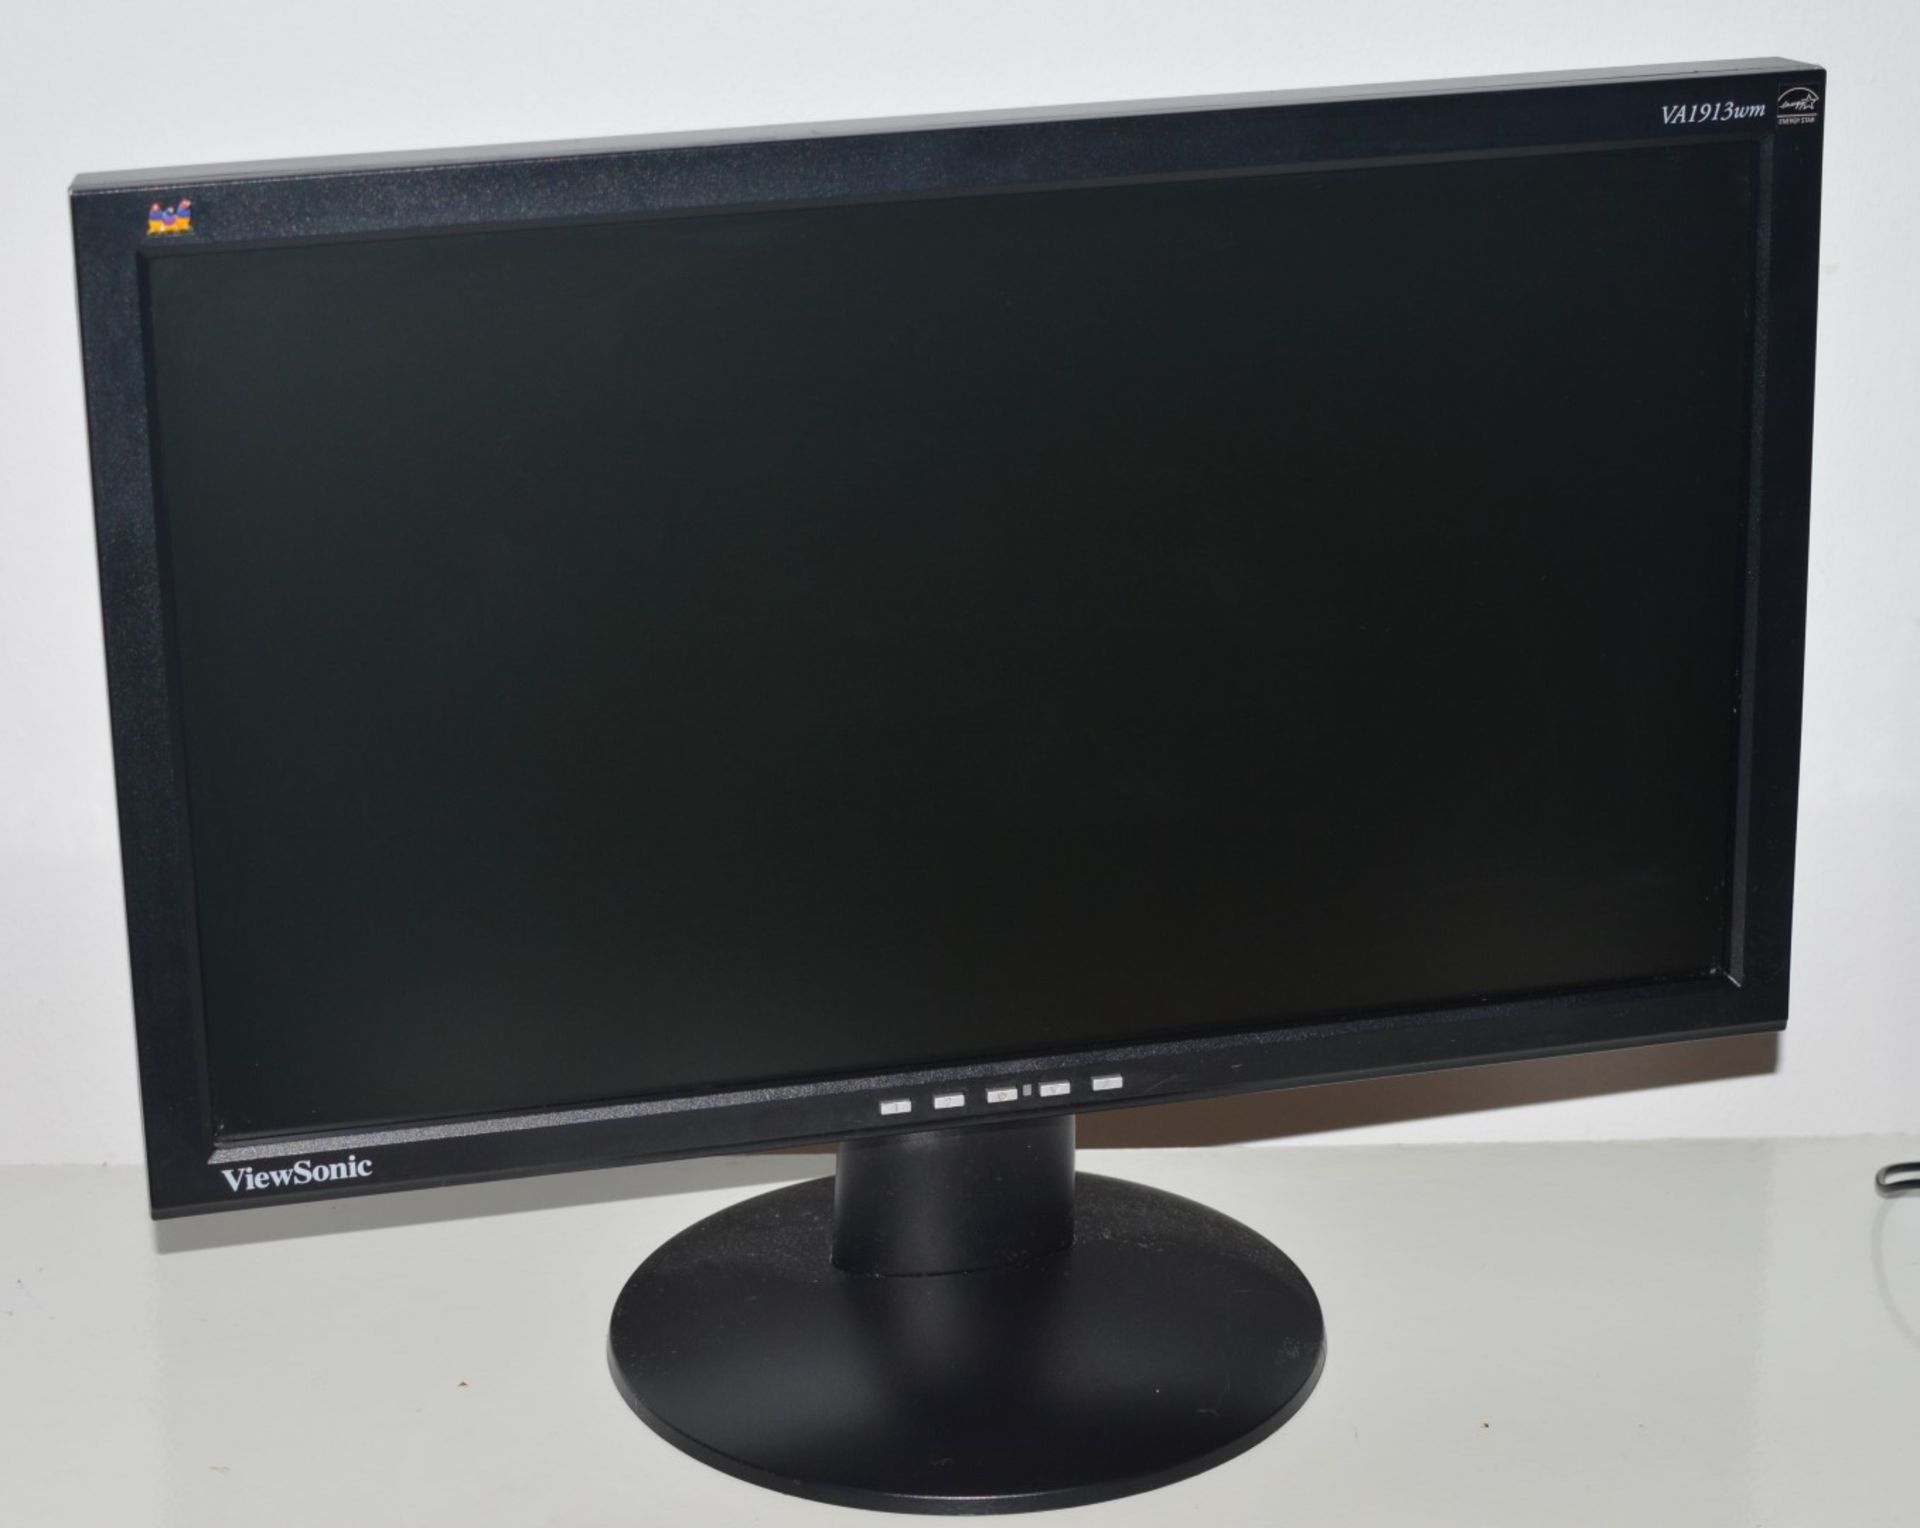 1 x ViewSonic 19 Inch Widescreen Monitor - With Power Cable - CL010 - Location: Altrincham WA14